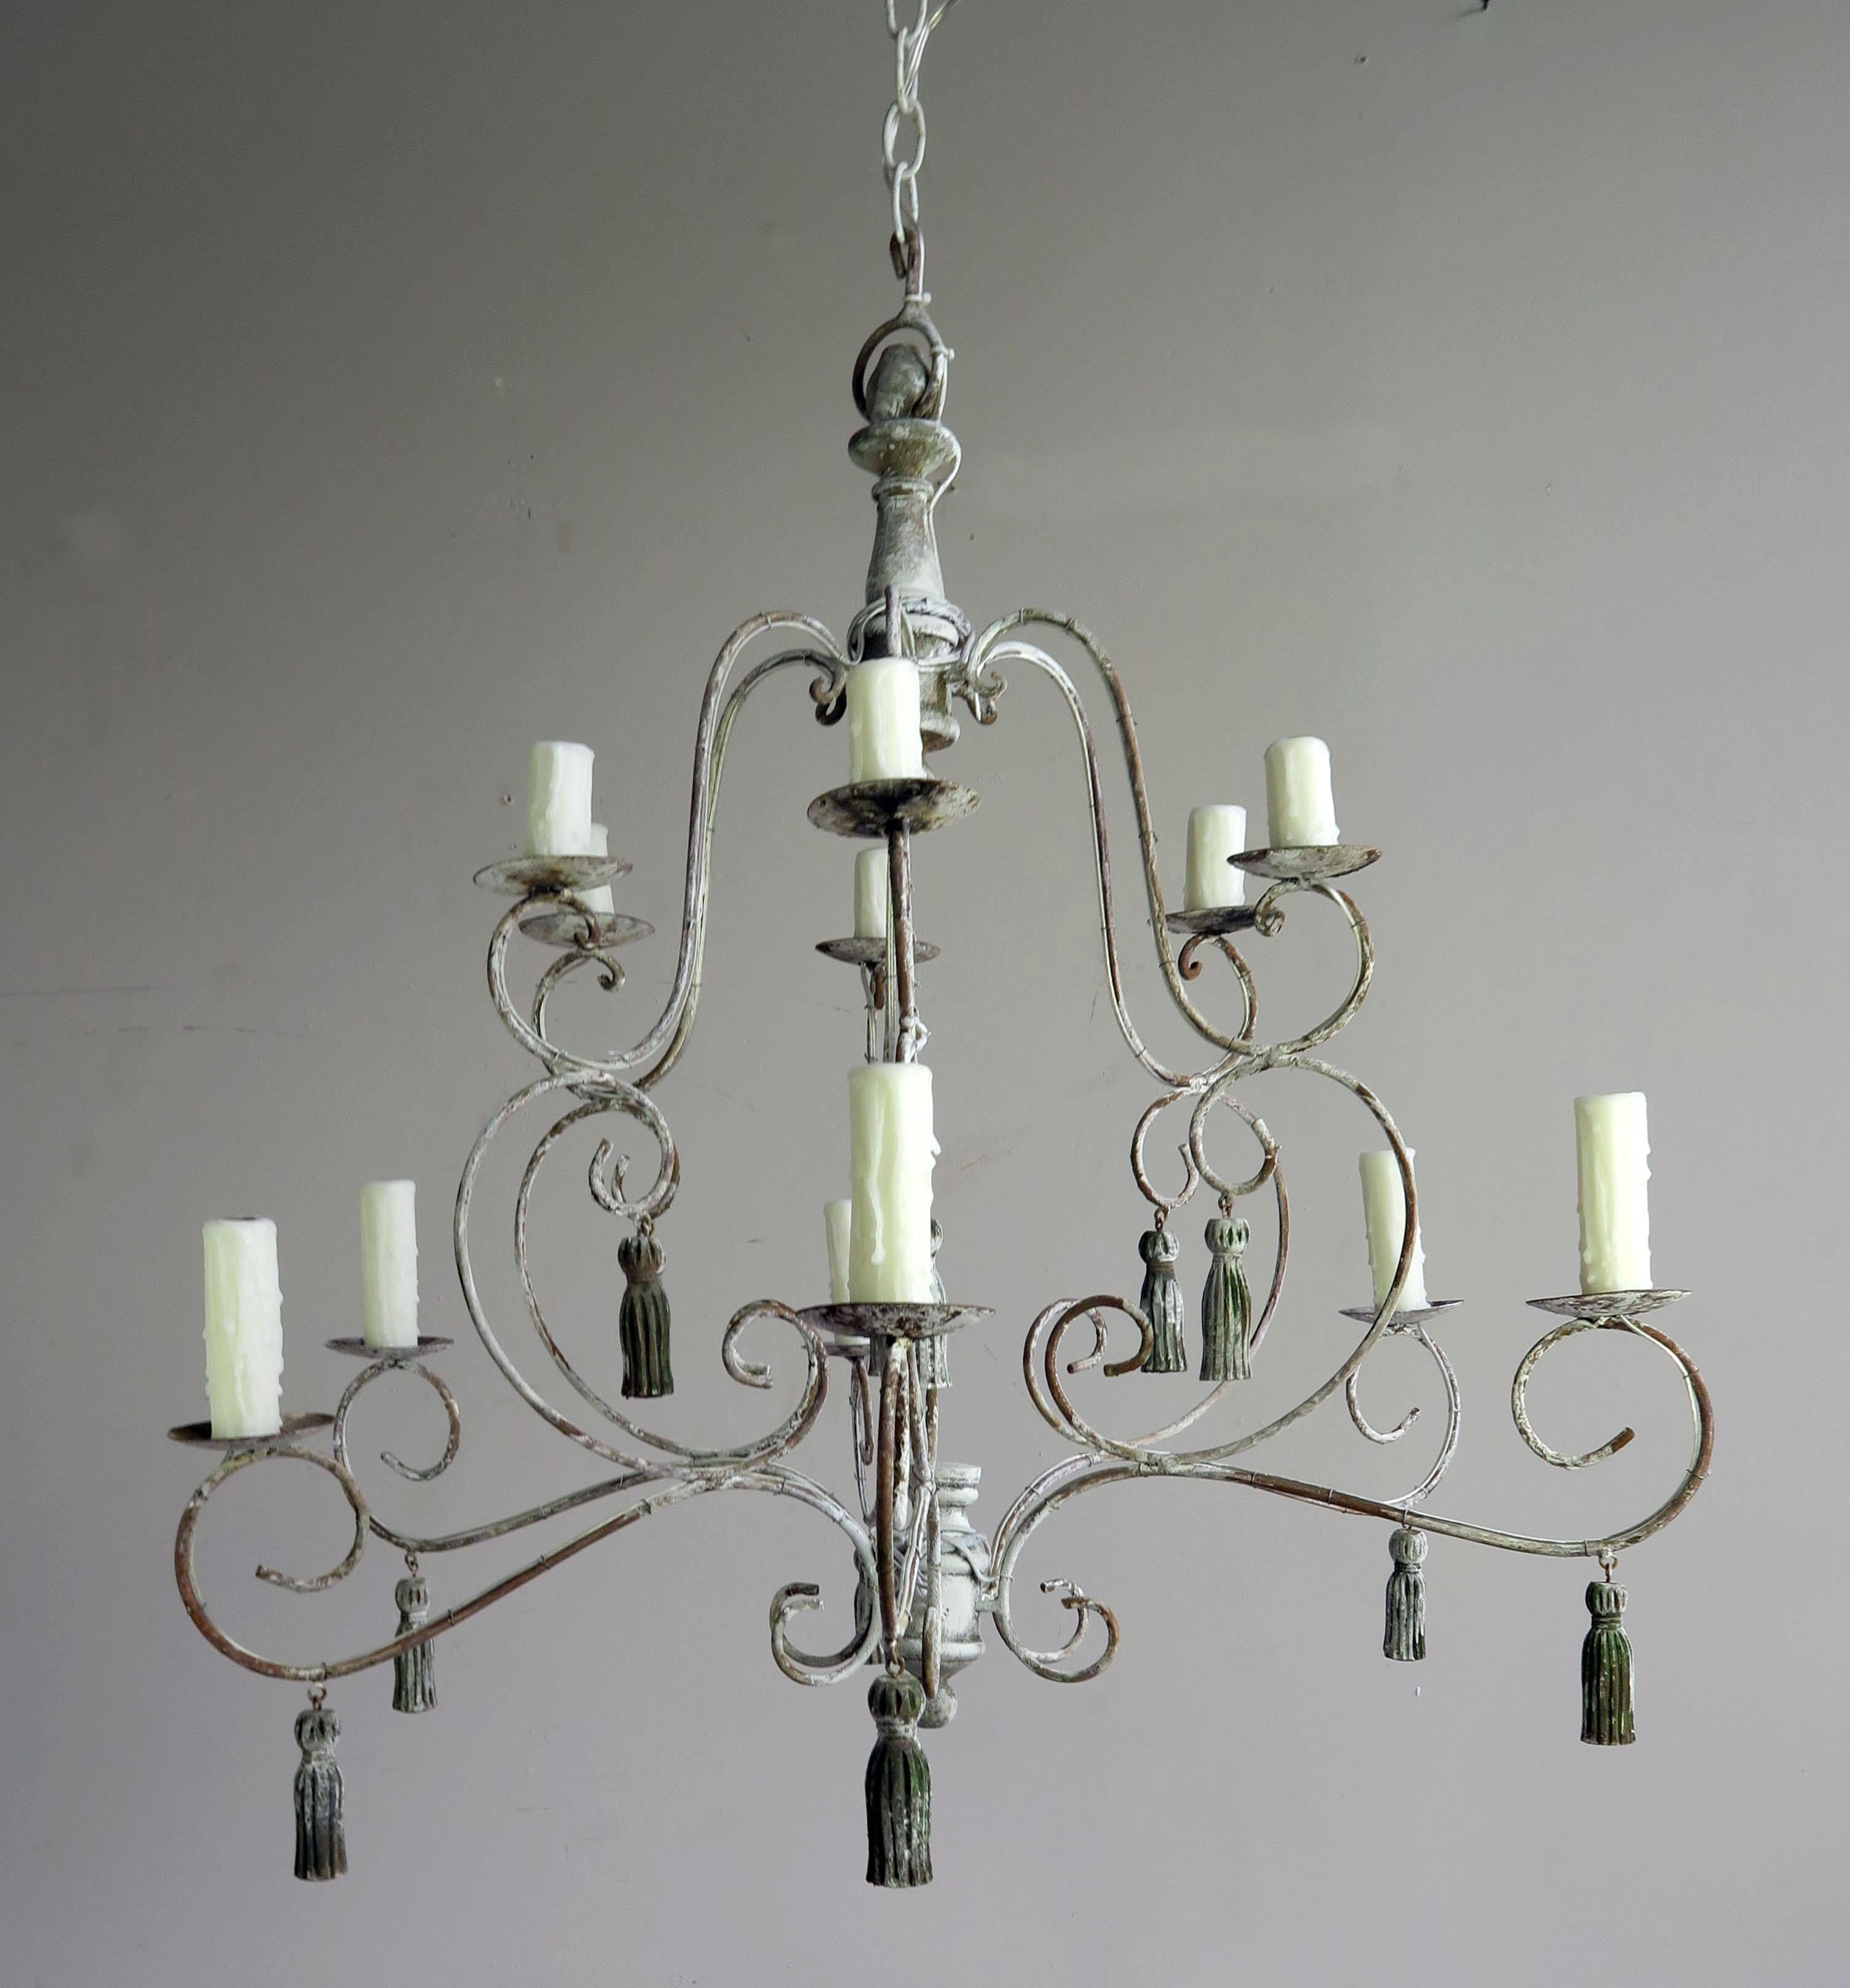 Twelve-light French iron and wood chandelier with beautiful worn painted finish. The fixture is newly rewired with drip wax candle covers. The chandelier includes chain and canopy. Twelve carved wood painted tassels throughout.